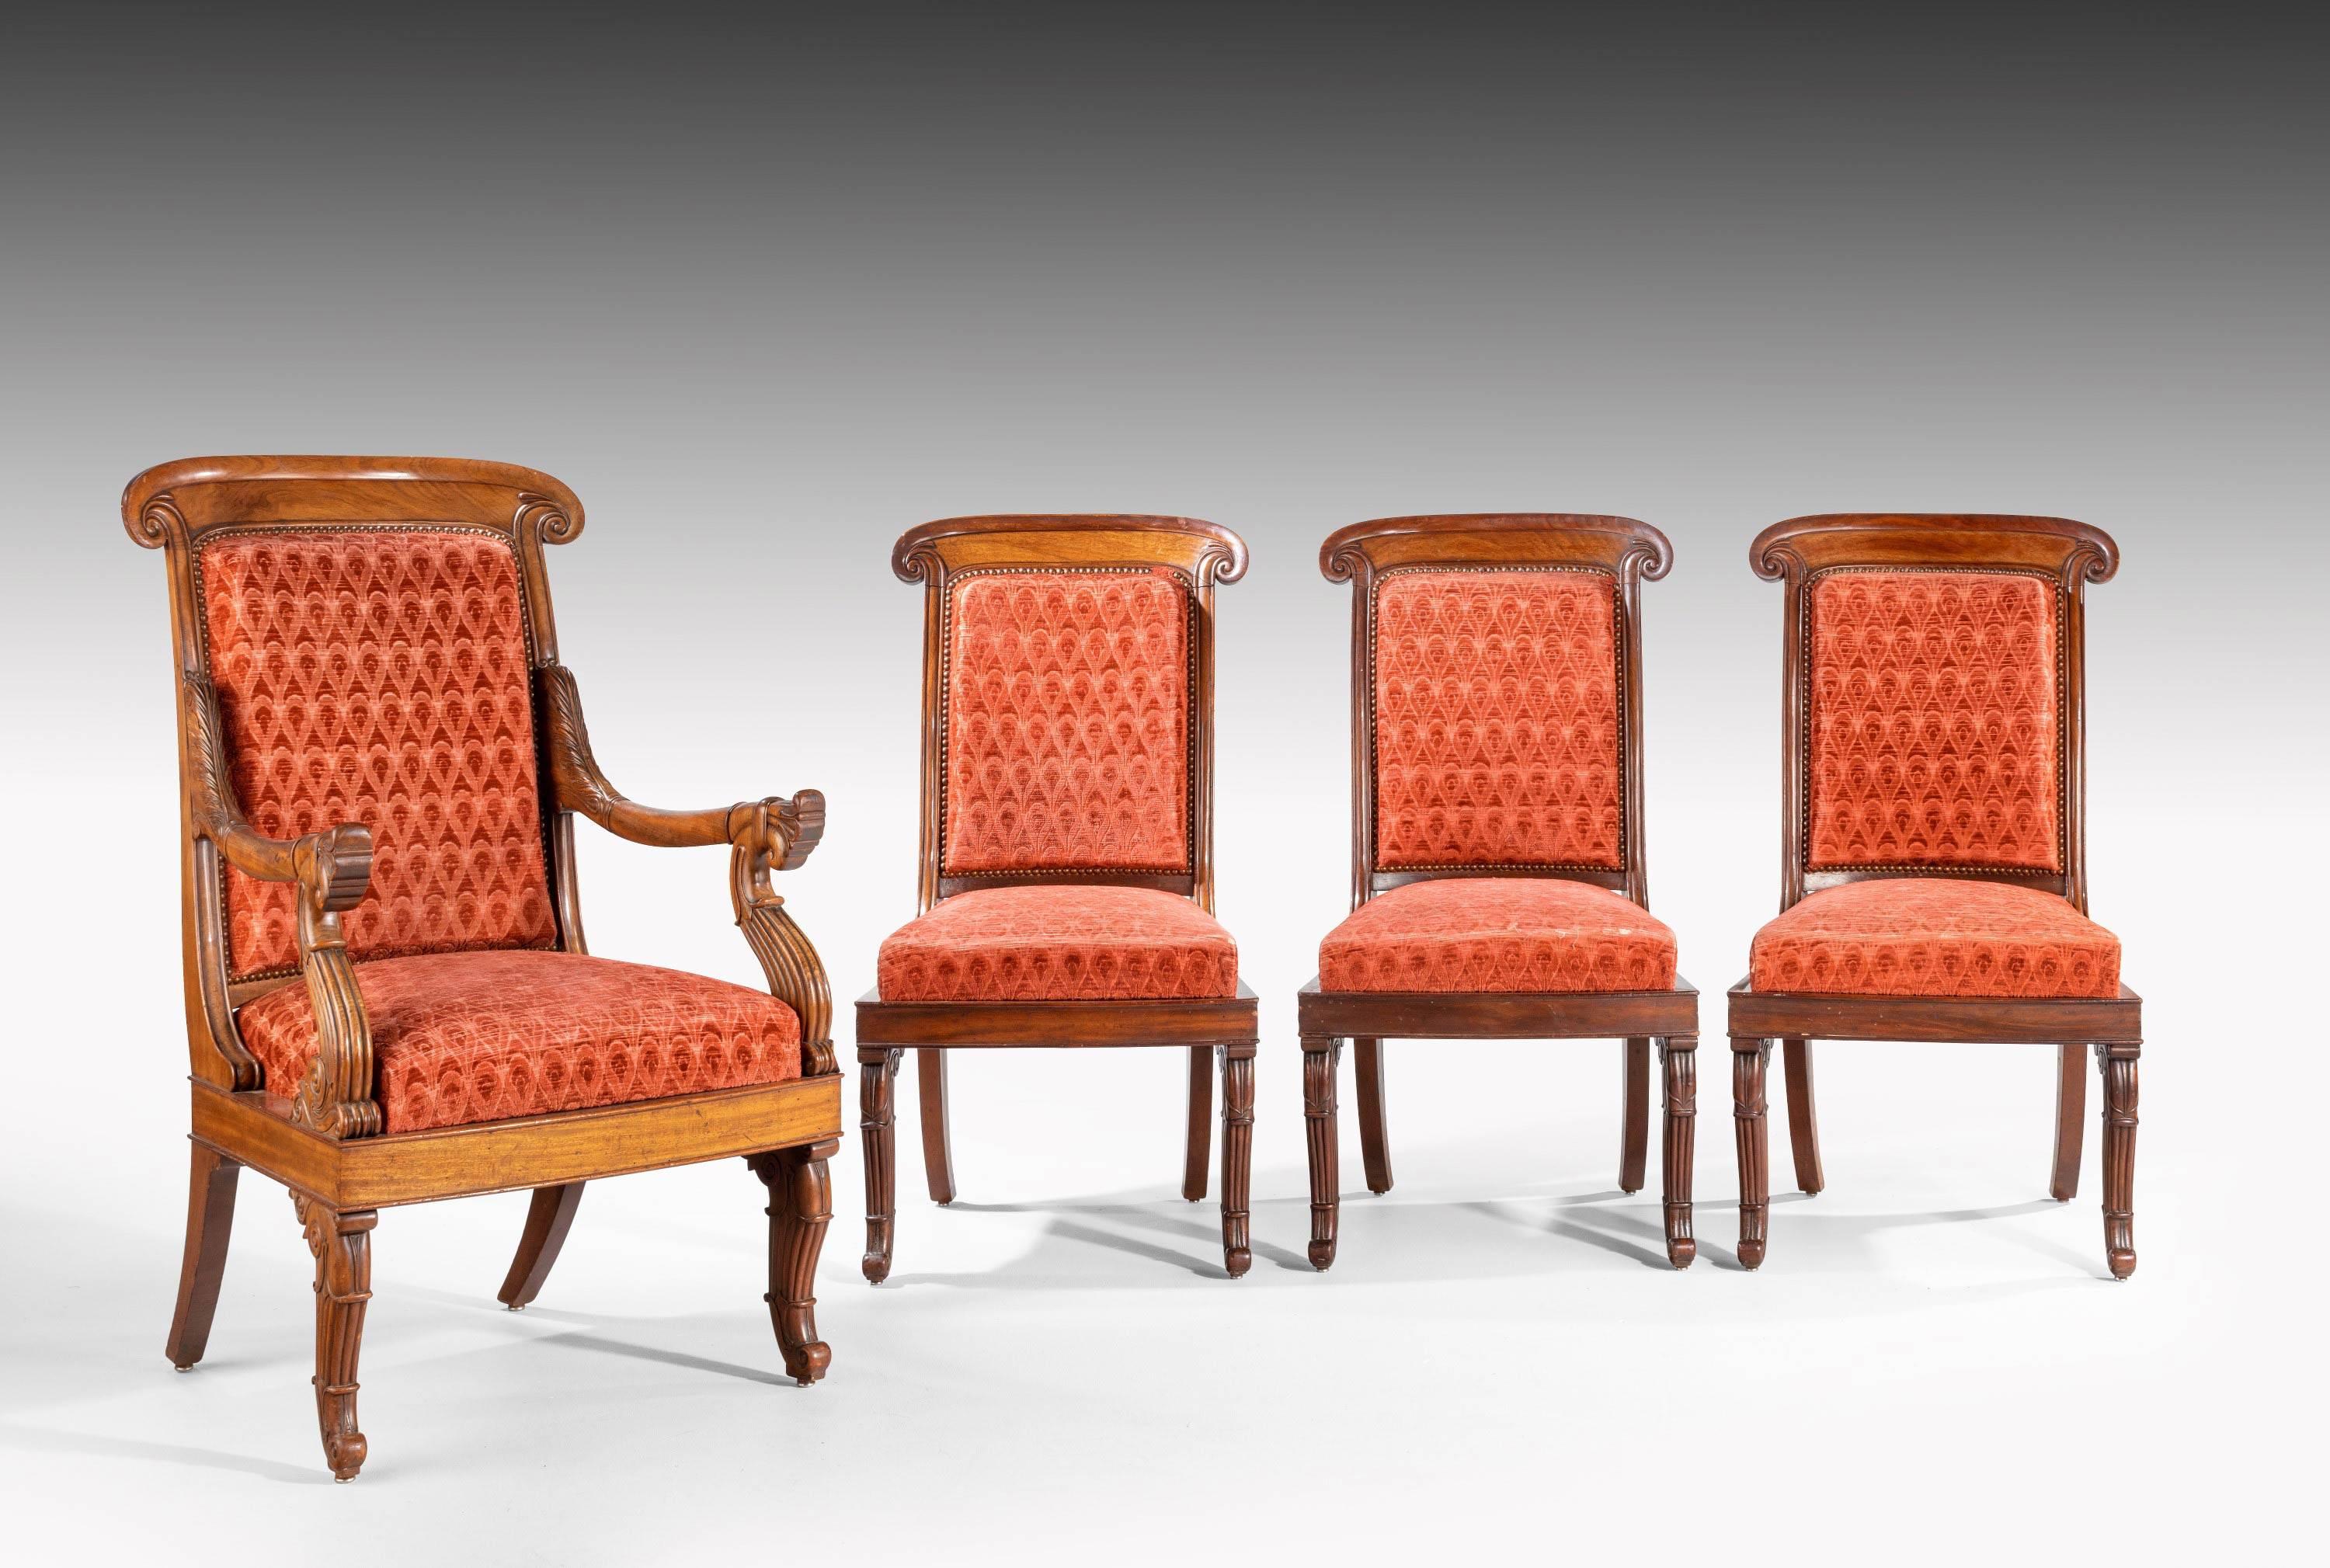 A very fine set of mahogany framed William IV chairs. Comprising six side chairs, and a pair of elbow chairs. The elbow chairs with elaborate scrolled arms and supports all of the supports of an unusual cabriole and banded design. 

Measure: Seat